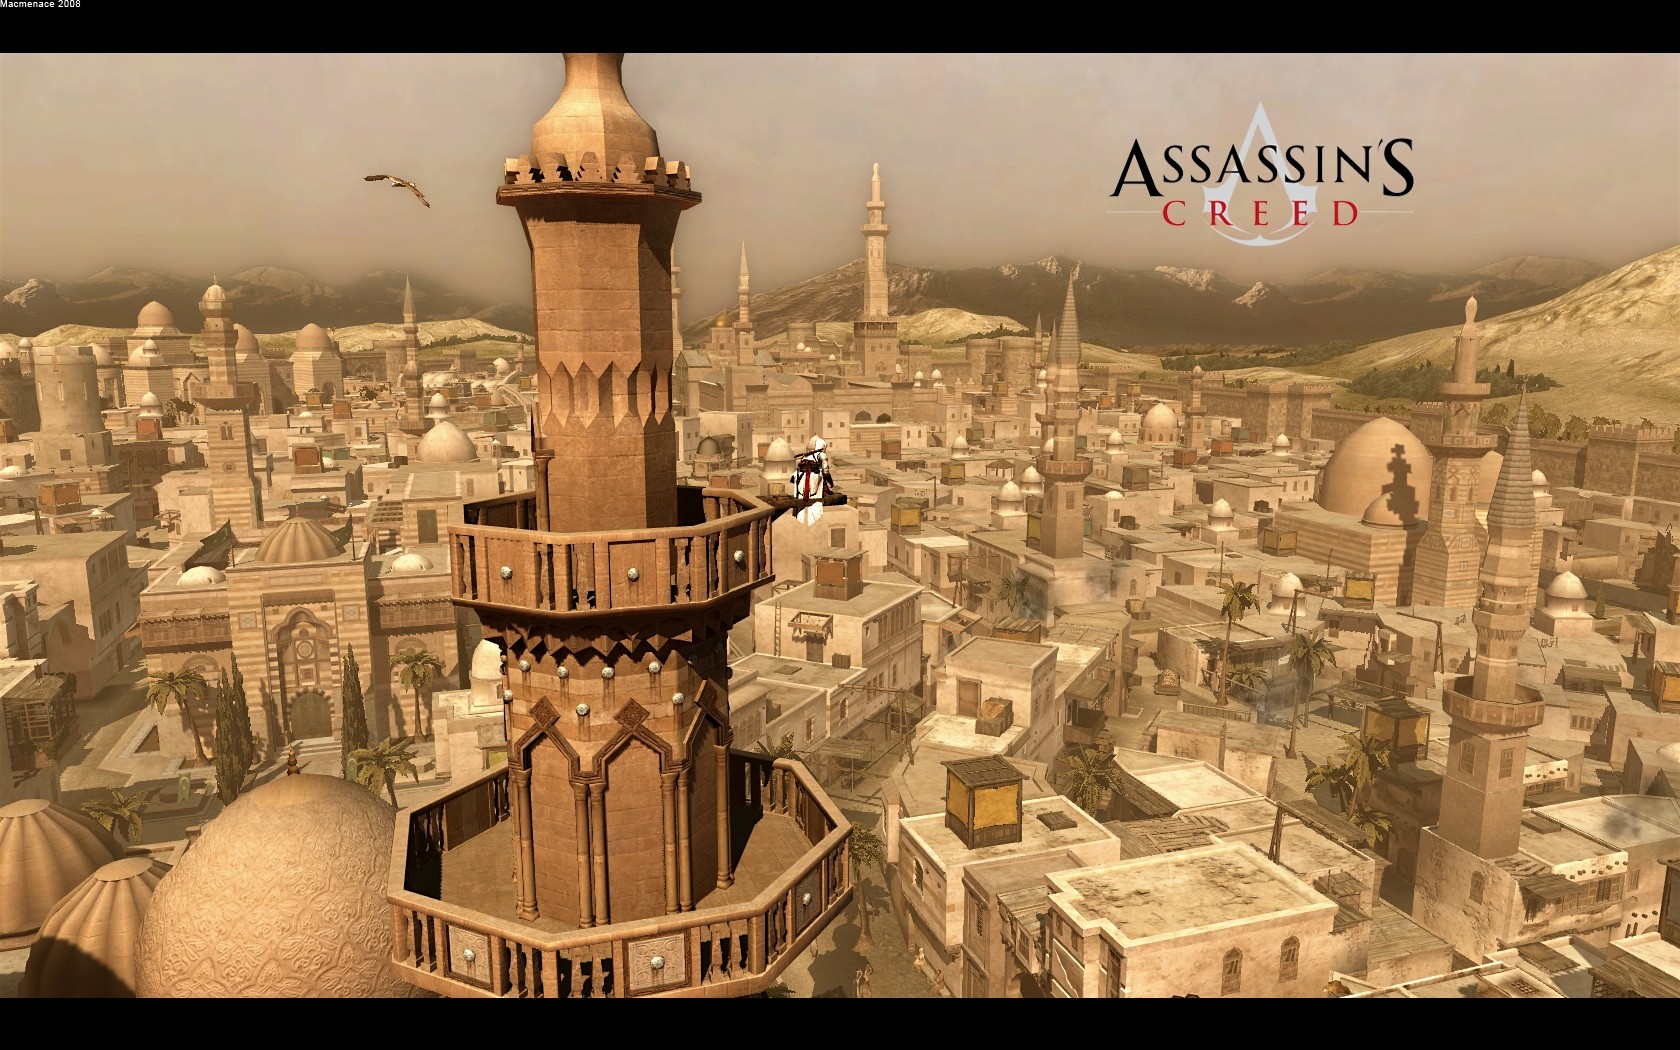 General 1680x1050 Assassin's Creed video games fantasy city PC gaming cityscape